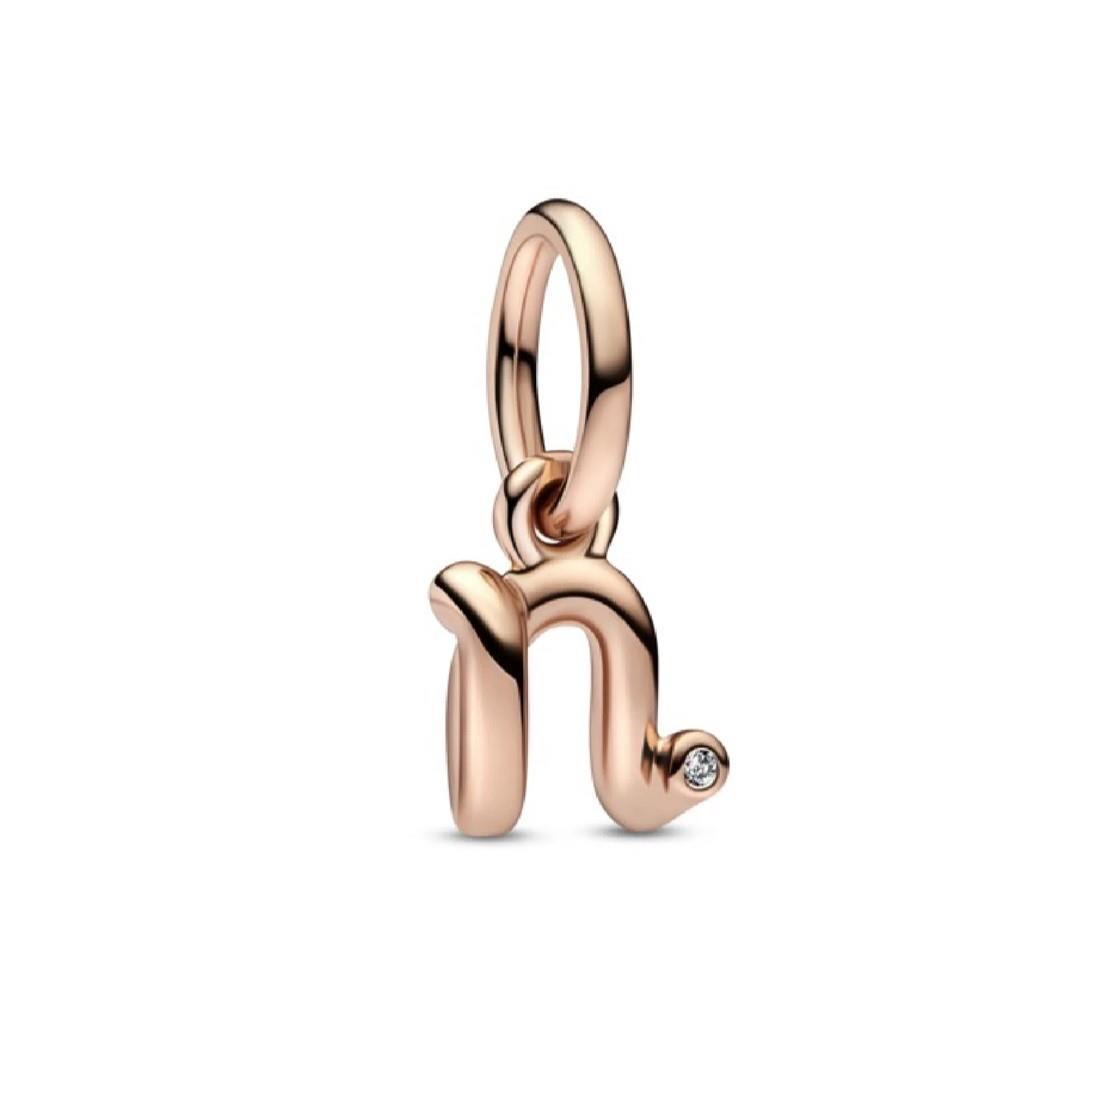 Alphabet pendant charm with letter n with rose gold plating - PANDORA